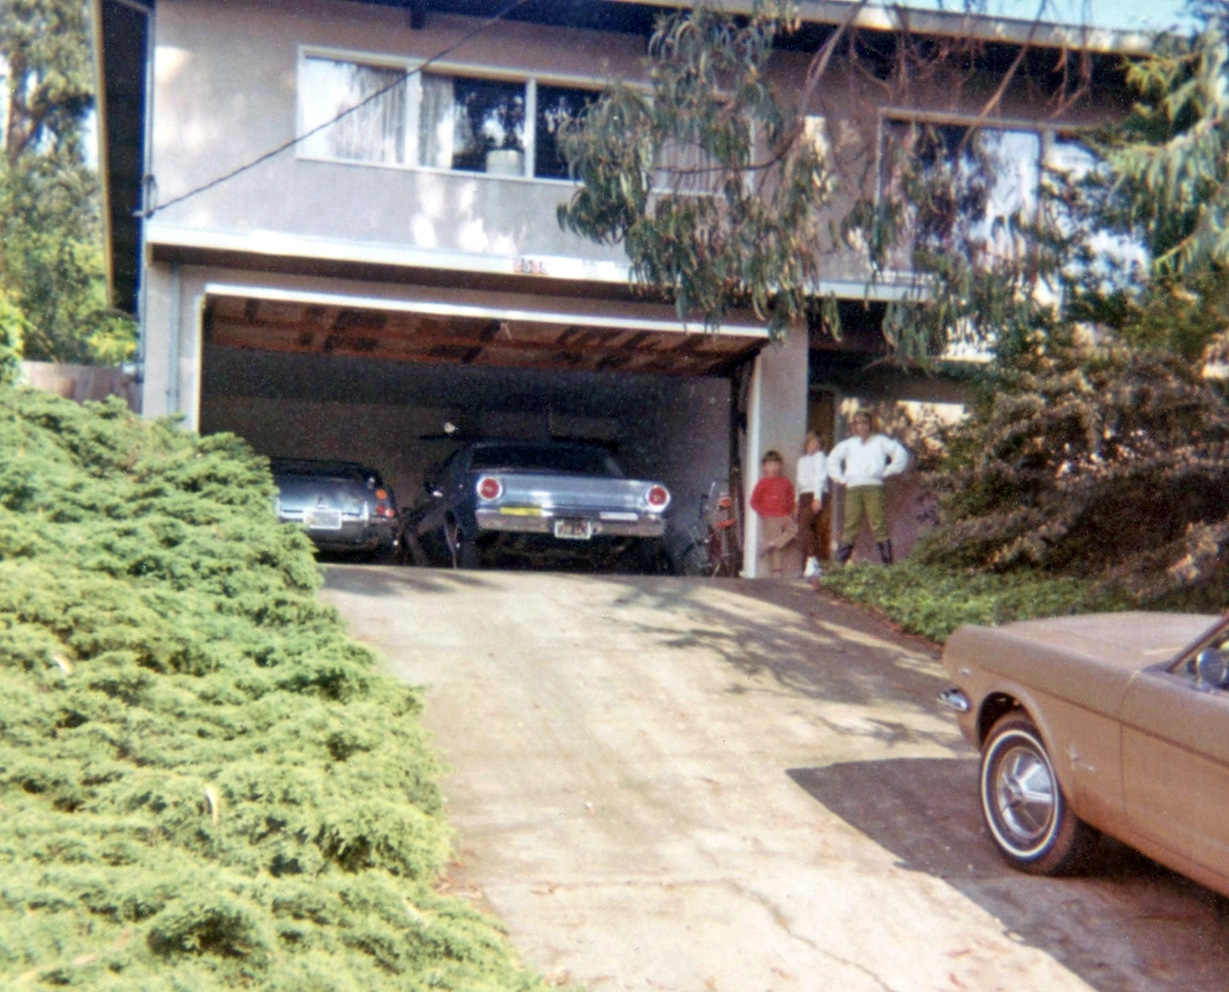 We lived in three different homes in the San Francisco East Bay hills between early 1963 and summer 1988 and this is the third house. (The first can be seen in the 1964 photos I posted with the '58 Cadillac in them.)  1967 and '68 were big years for my family as my dad came into an inheritance and bought this house and a new Austin-Healey 3000 Mk. III, also posted previously.  The front yard had two tall eucalyptus trees that had been poorly topped several years before we moved in and the trees would snap large limbs that would come crashing down in storms.  That drooping limb in the photo came down one windy and rainy Saturday in 1980 and just missed my buddy's '66 Chevelle that was parked in the driveway.  I do miss the sound of acorns dropping on the flat tar-paper roof and the smell of eucalyptus oil.  That's me and my two older sisters posing by the garage.  Mom's '66 Falcon next to dad's Healey and my aunt's '65 Mustang coupe there in the driveway. View full size.